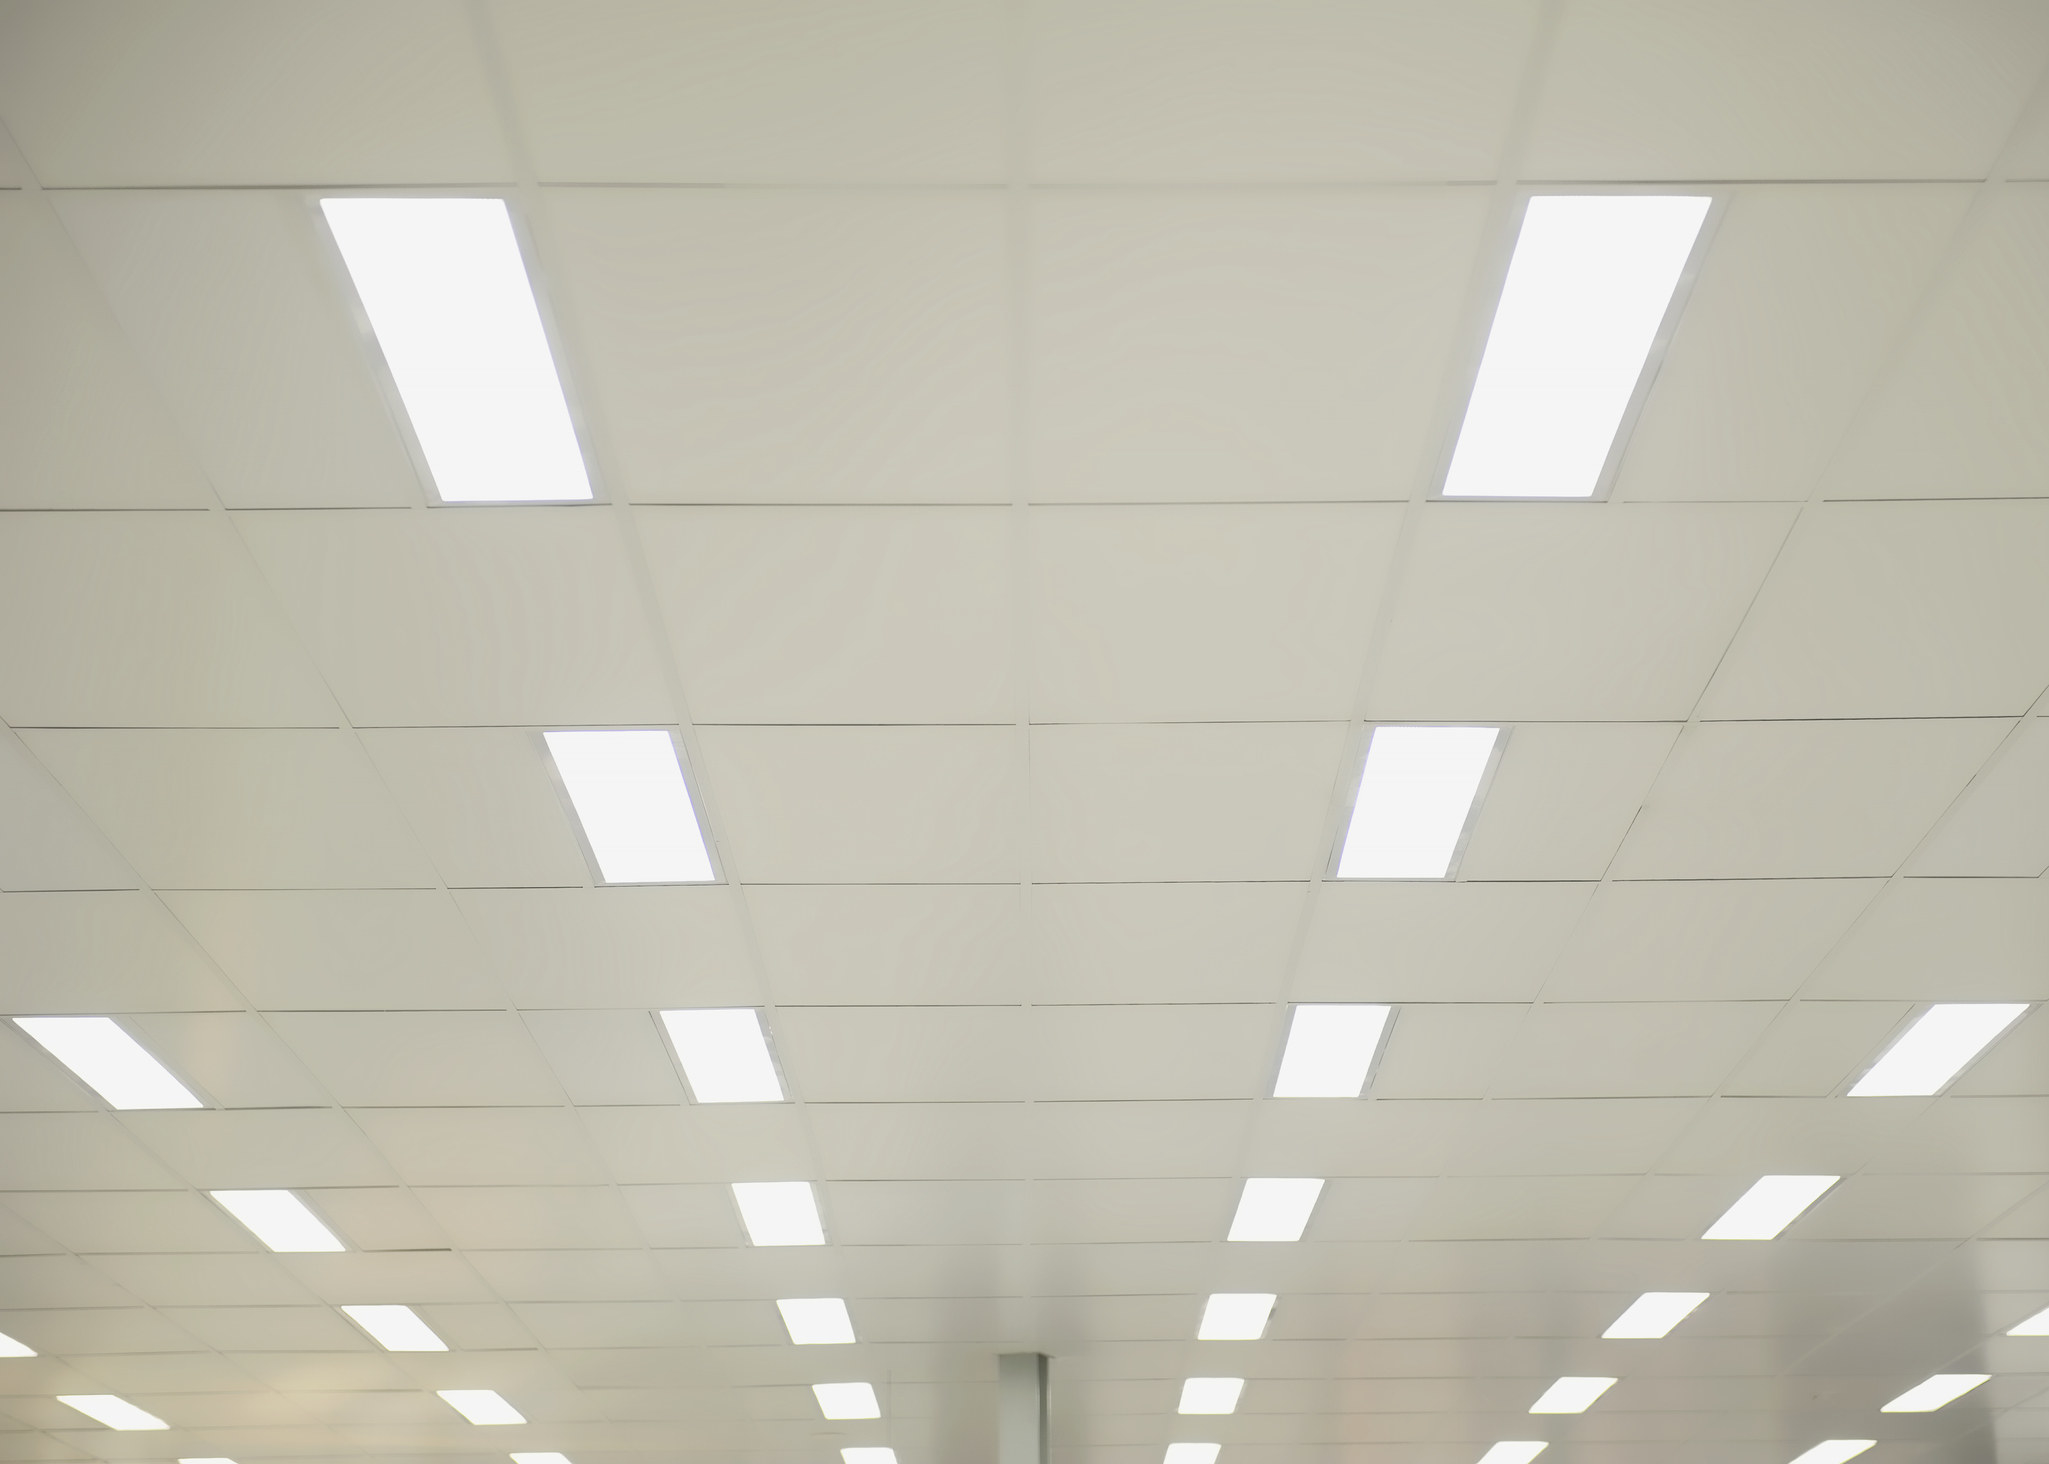 Fluorescent lighting in a drop ceiling